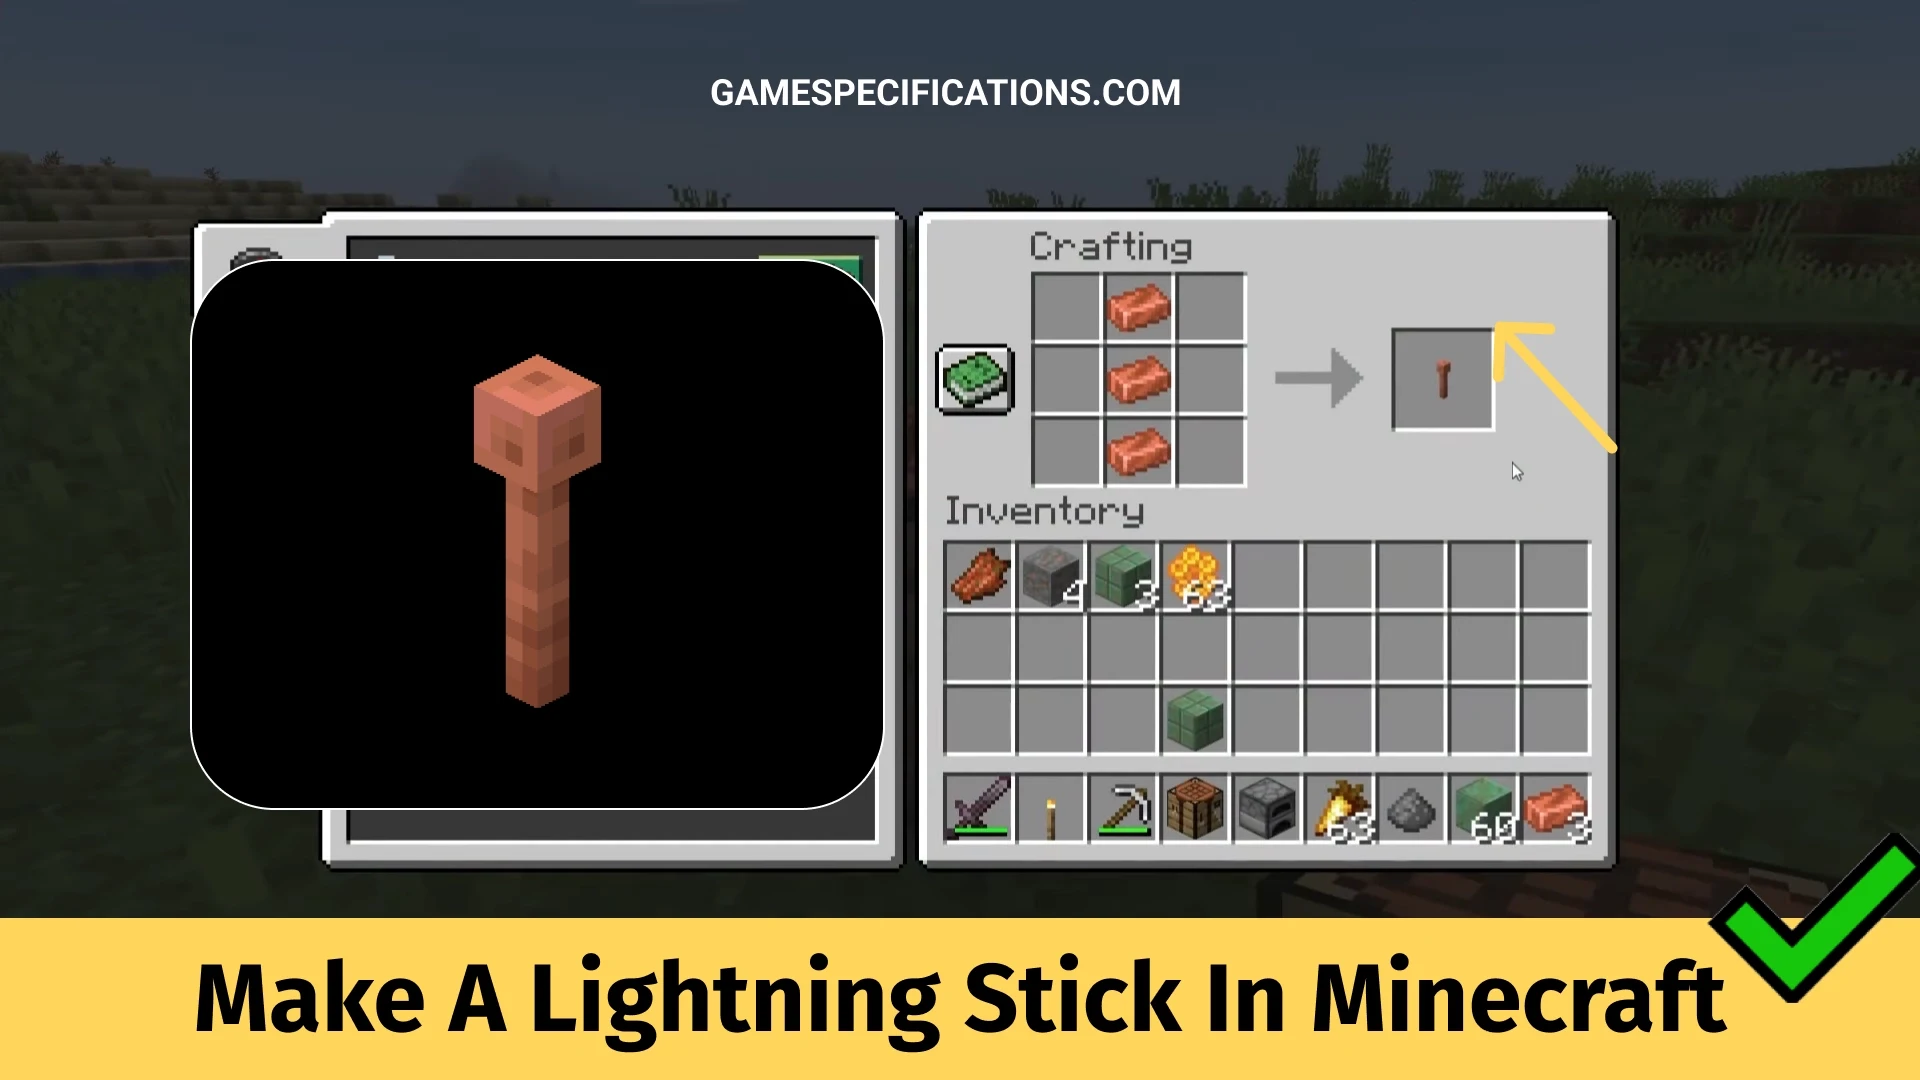 How To Make A Lightning Stick In Minecraft - Game Specifications